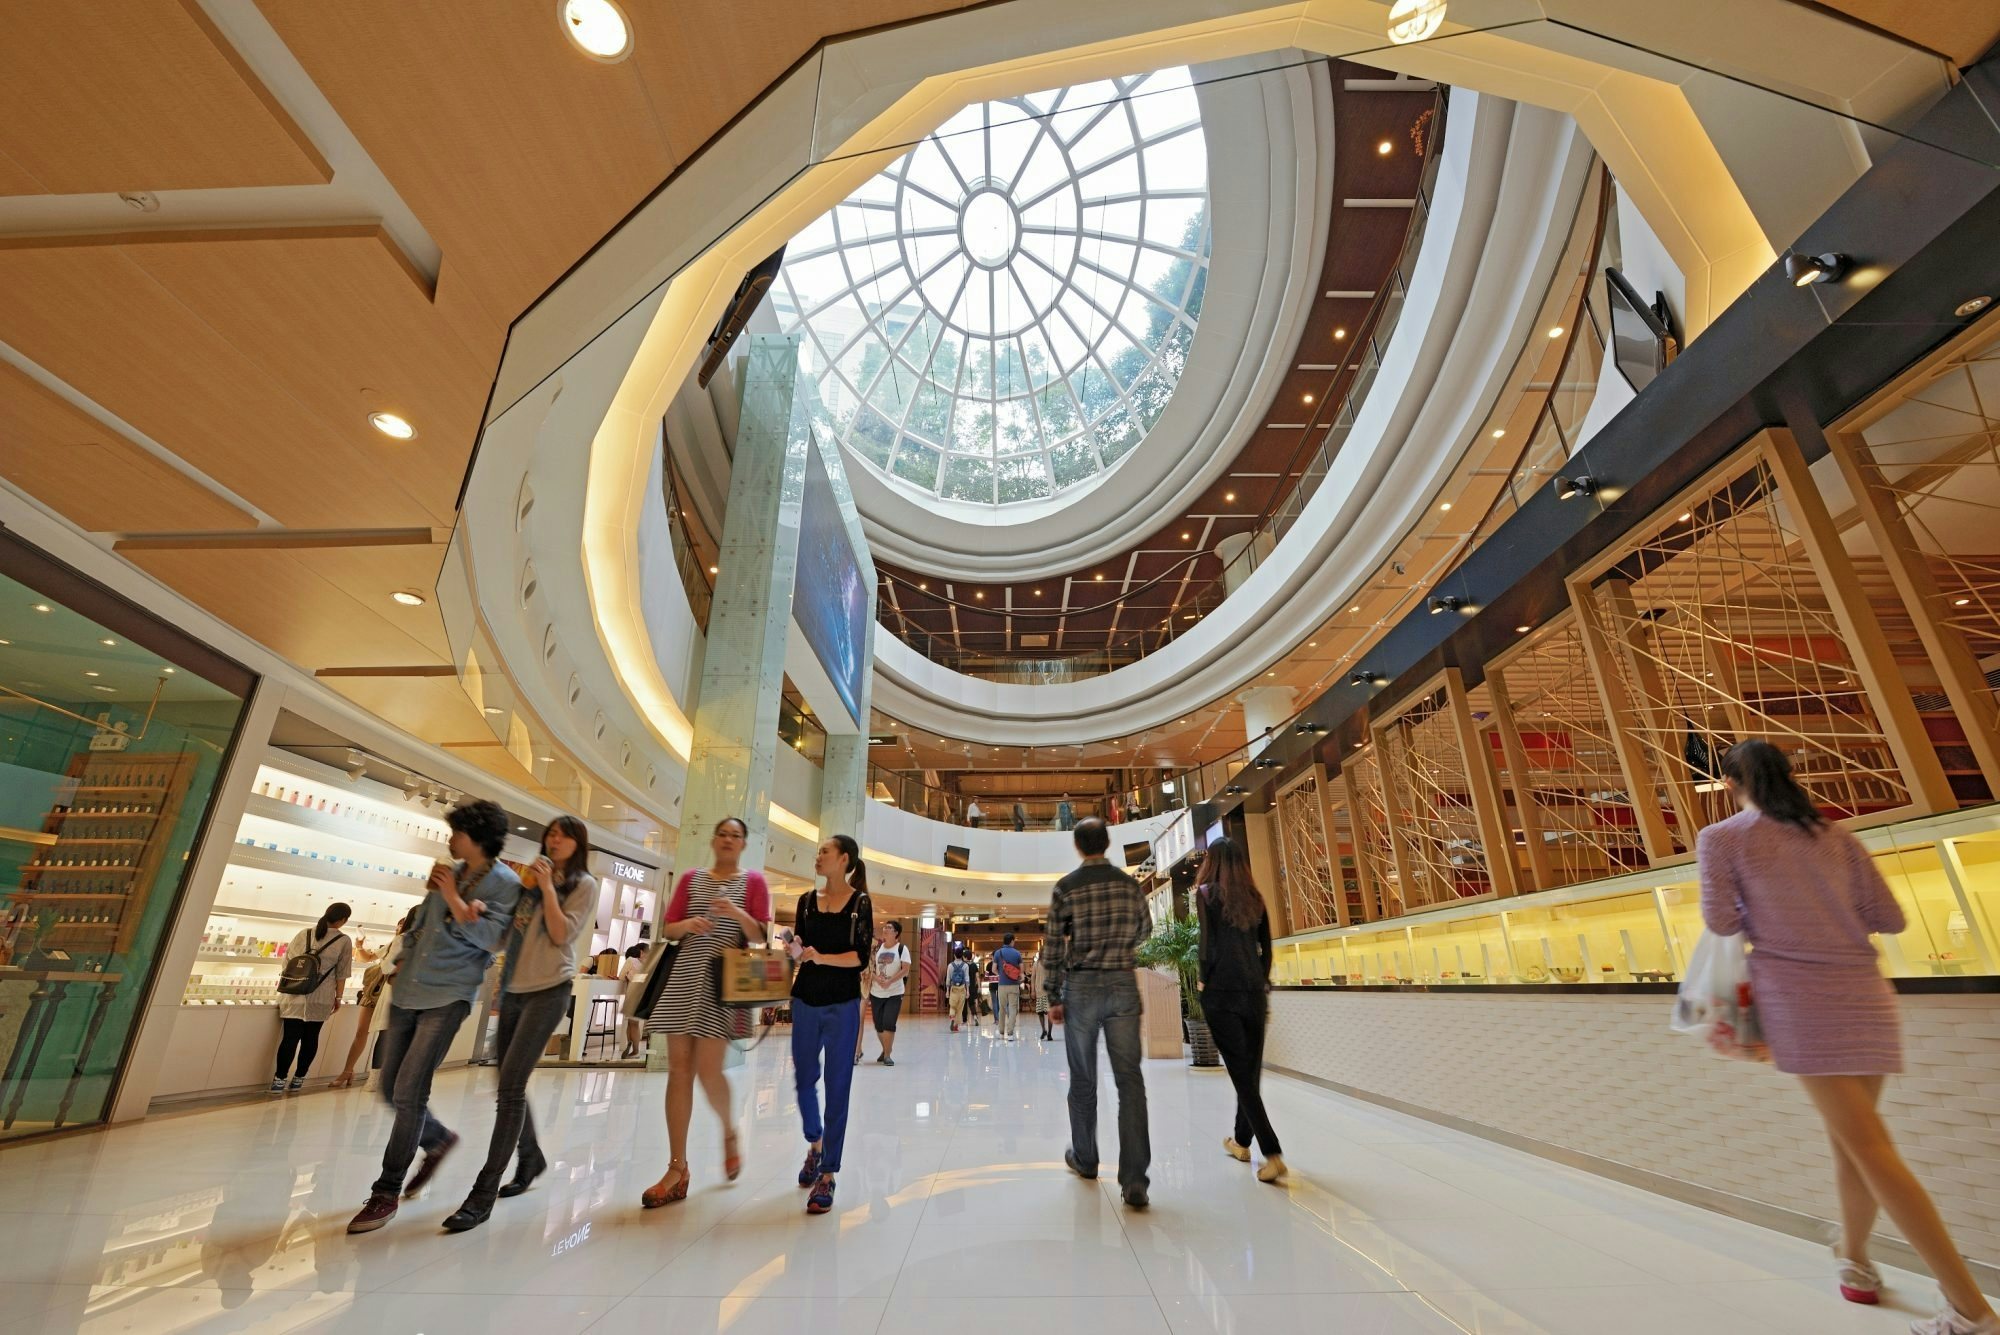 Xintiandi Style, a Shanghai mall featuring almost exclusively Chinese luxury brands, said its traffic has almost doubled since its opening in 2011. (Courtesy Photo)